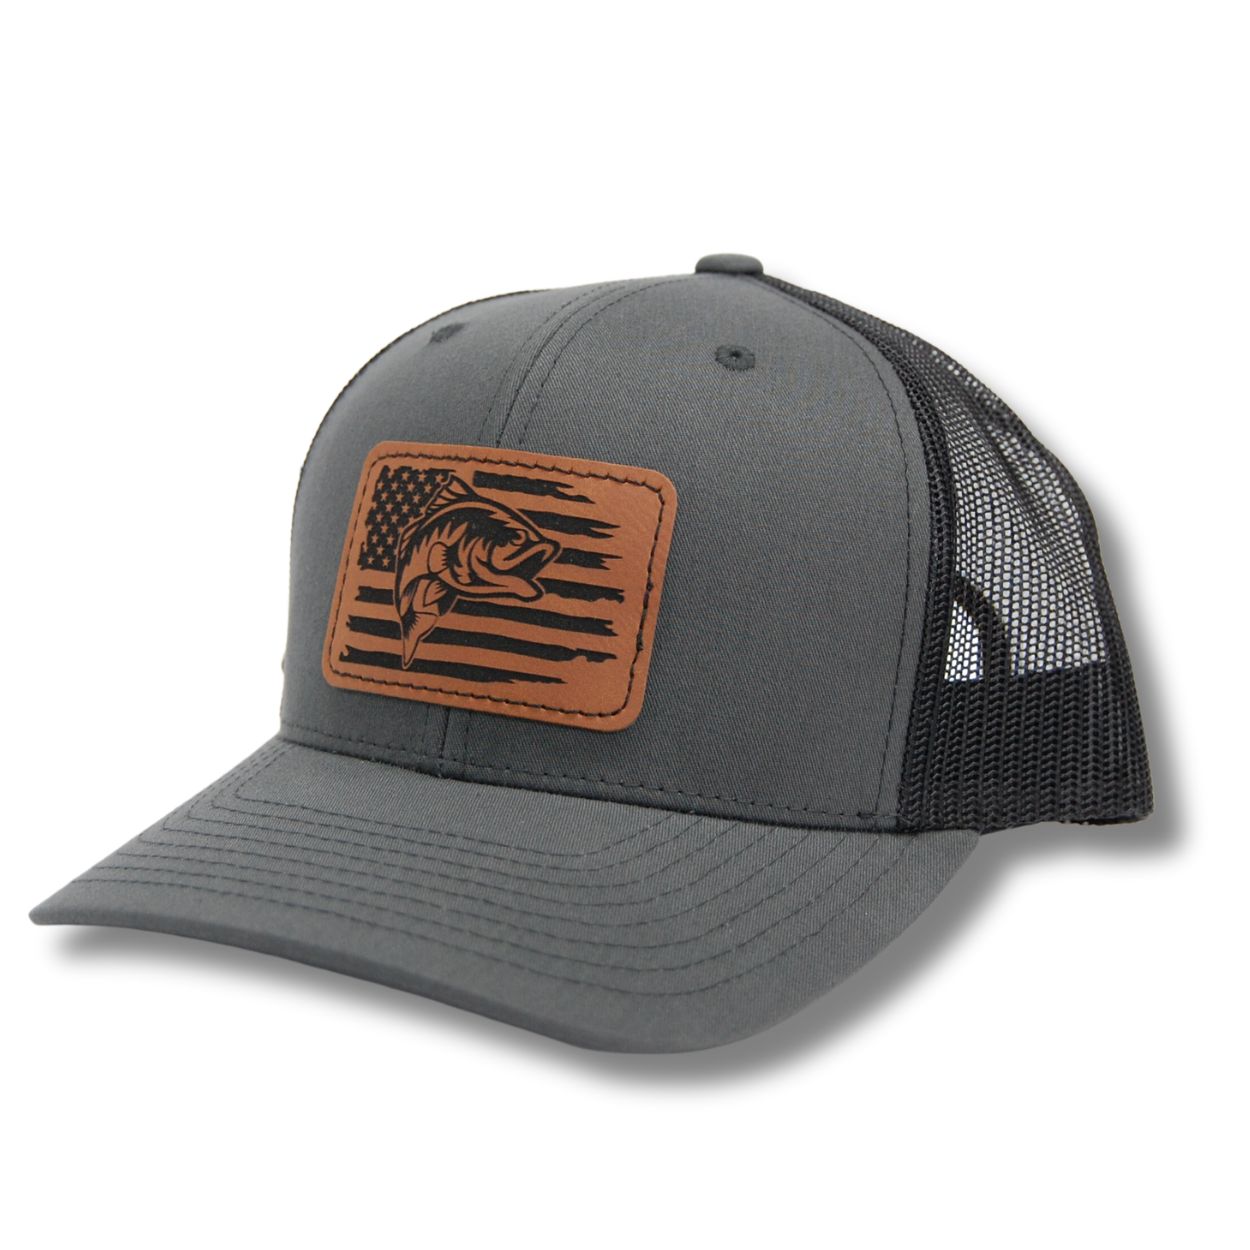 Naicissism American Fish Flag Trucker Hats - Fishing Gifts for Men - Outdoor Snapback Fishing Hats Perfect for Camping and Daily Use (03.Leather Fish